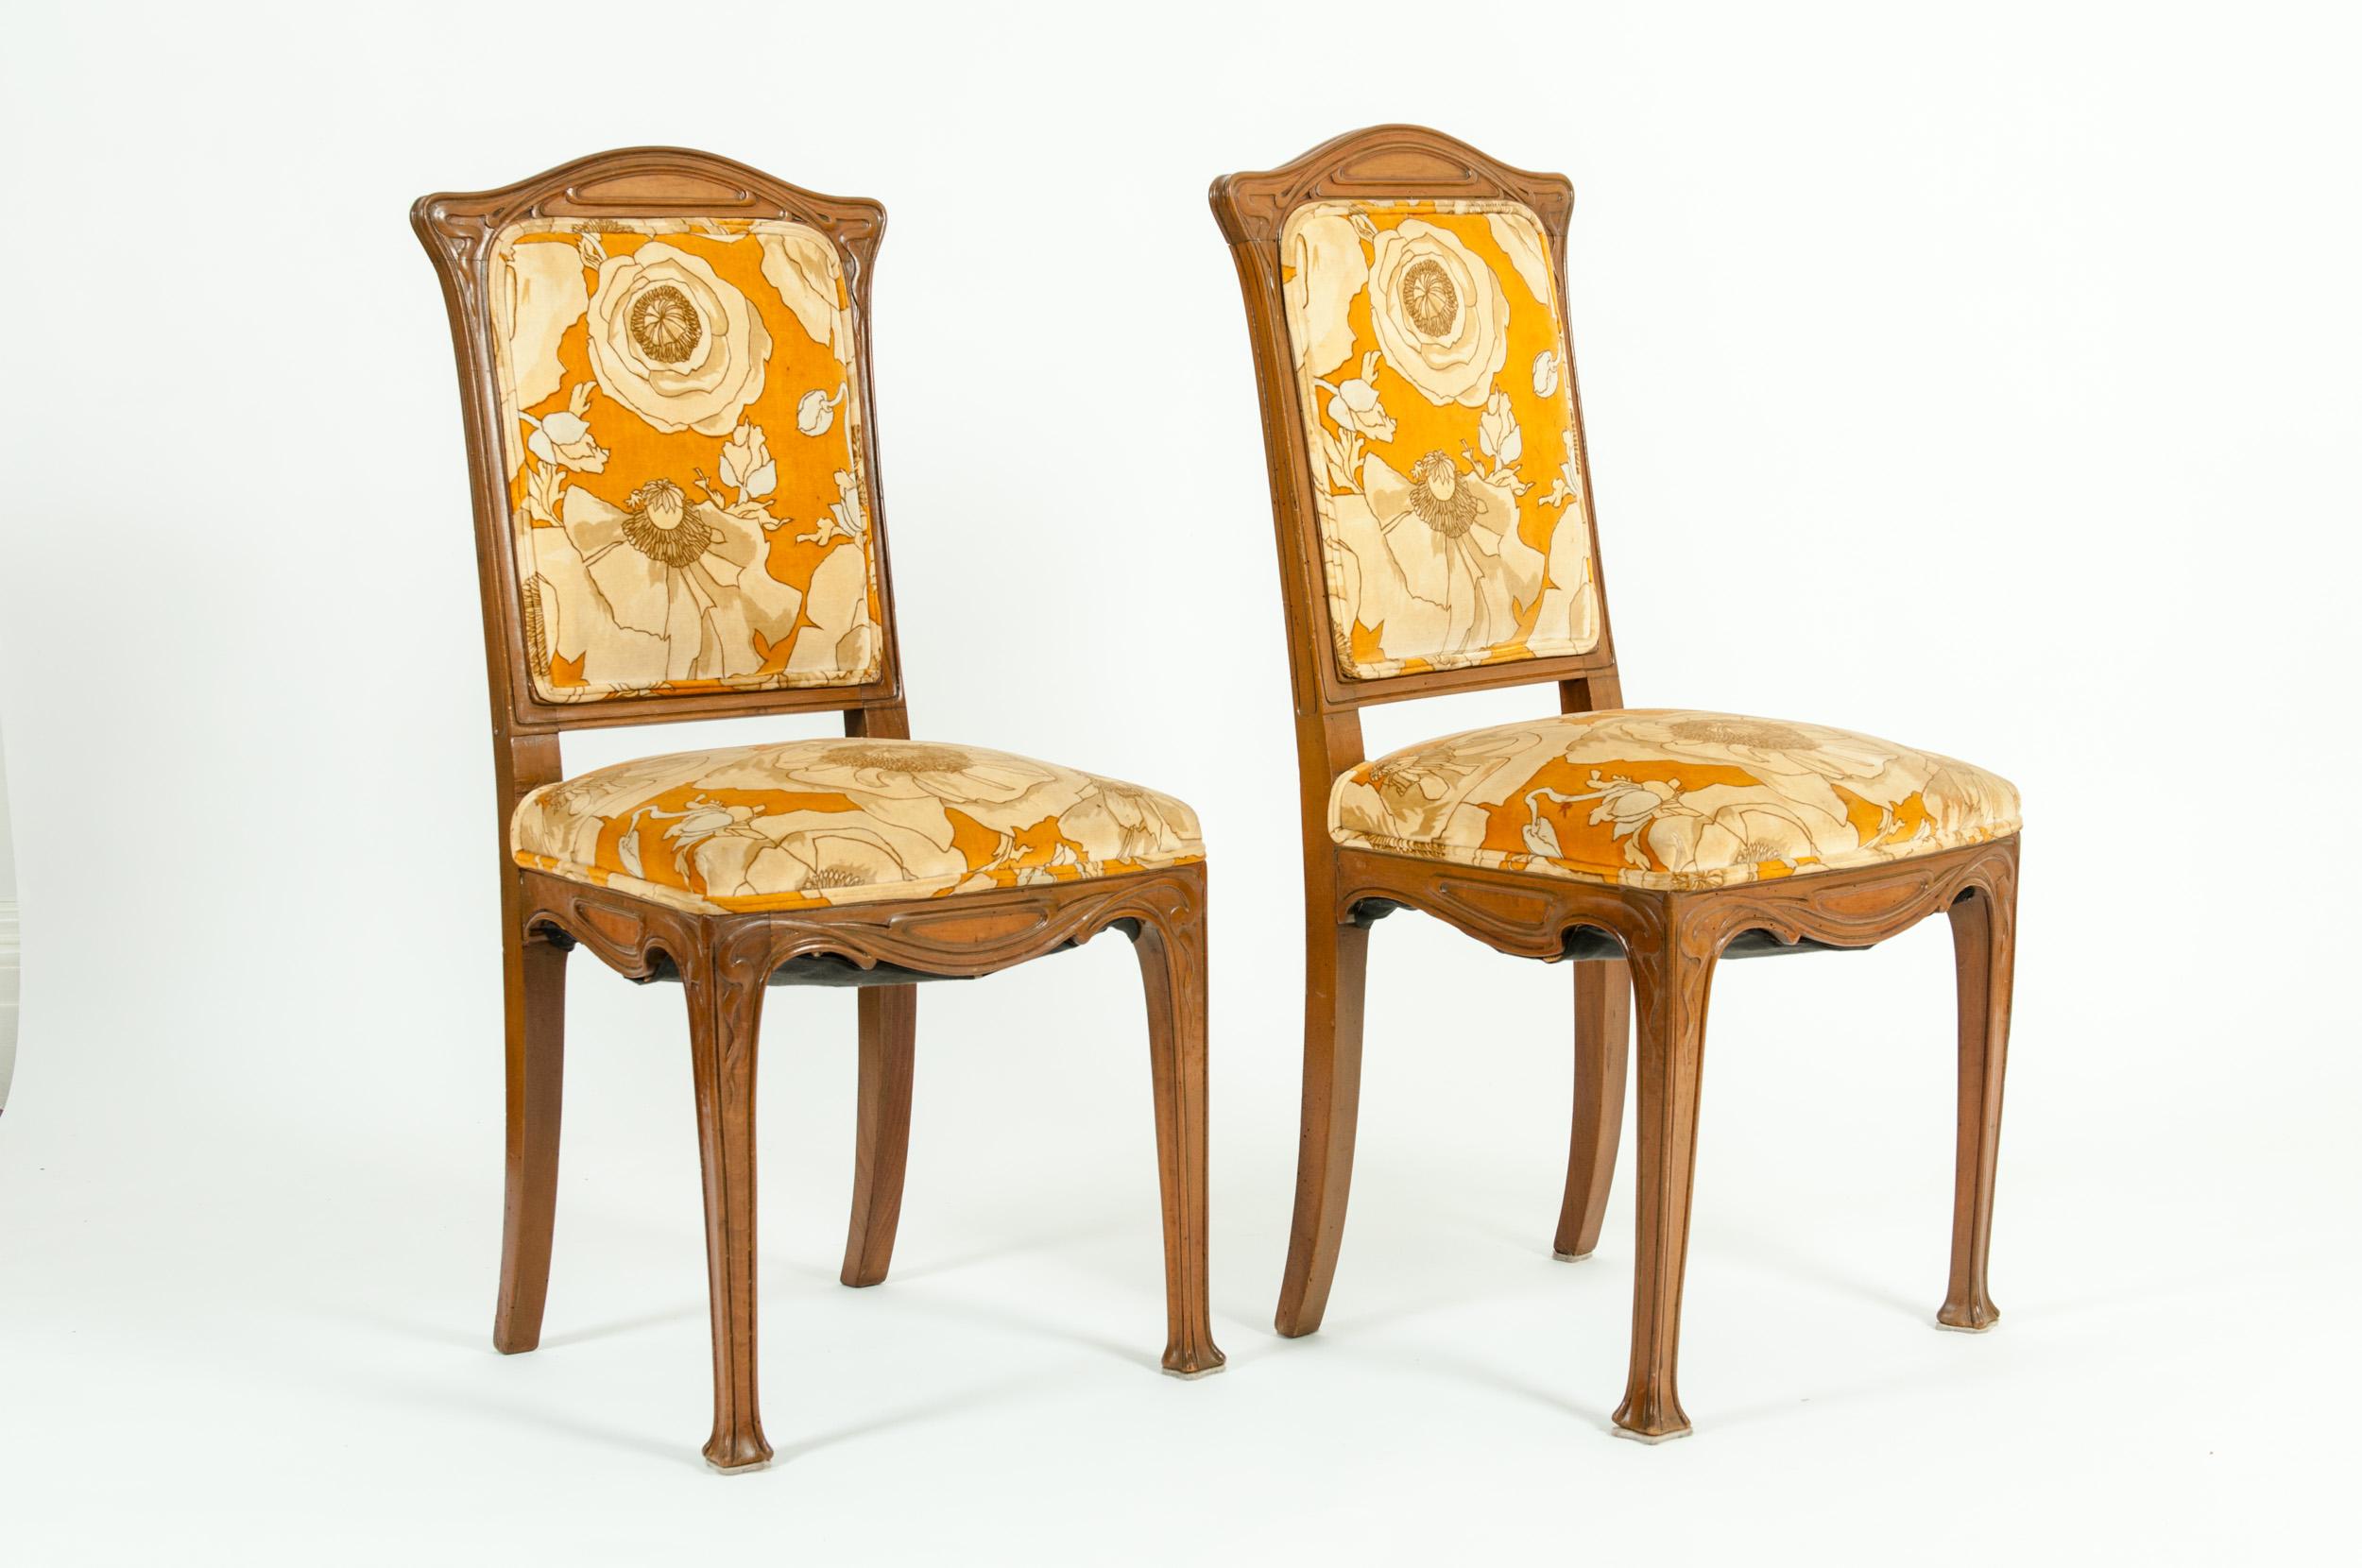 Early 20th century Louis Majorelle pair side chair . Each piece is in great vintage condition with appropriate wear consistent with age / use . Each is about 37 inches high x 15.5 inches deep x seat high 17 inches.